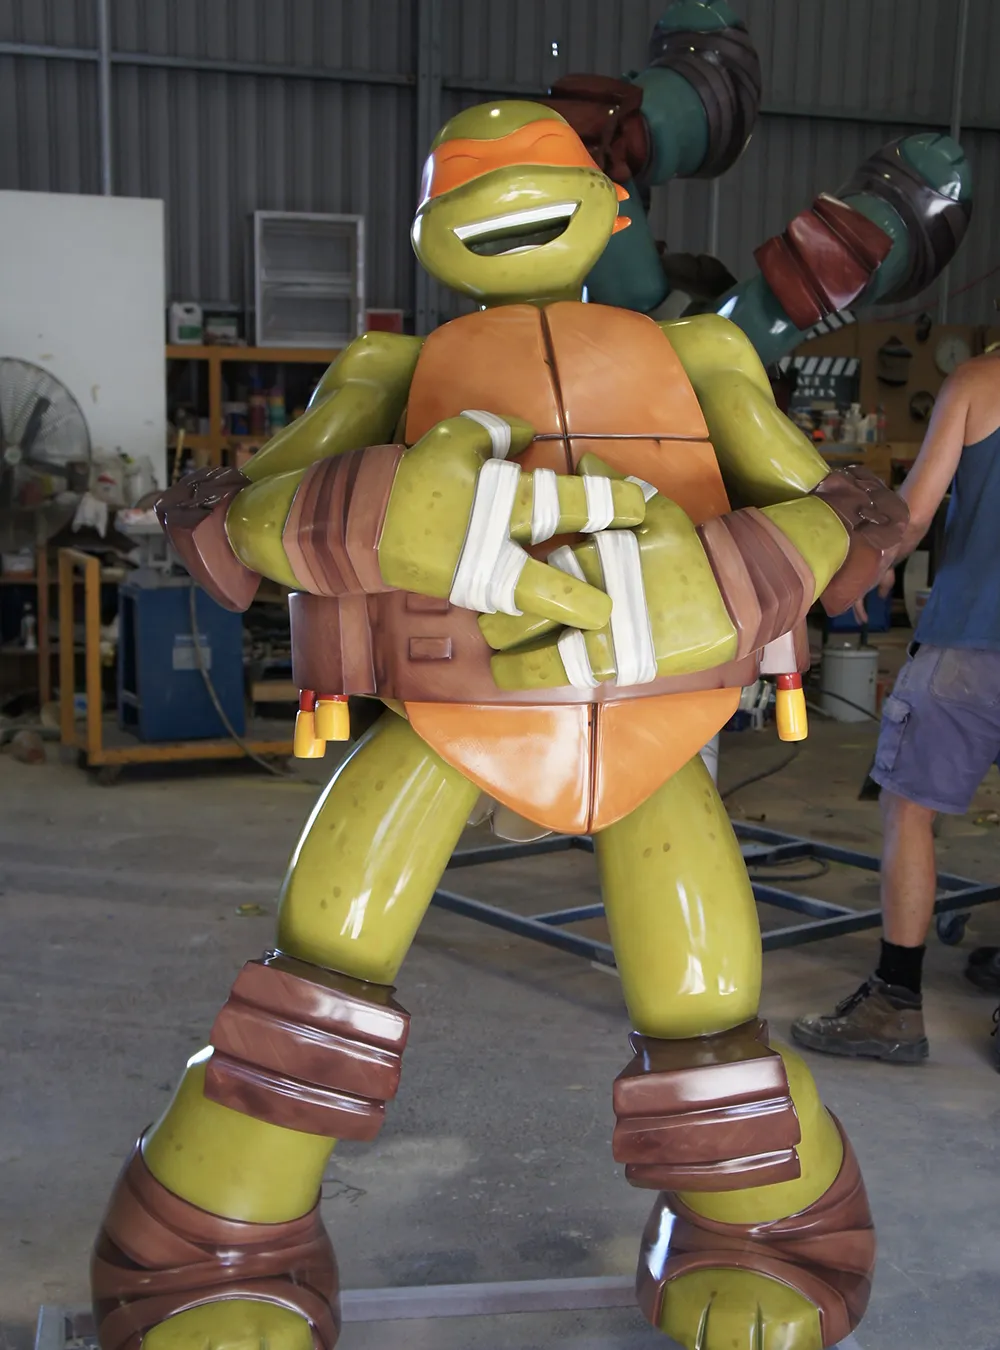 Lifelike sculpture of Michelangelo, the Teenage Mutant Ninja Turtle, confidently holding nunchaku, set in a workshop, designed and created by Sculpt Studios.